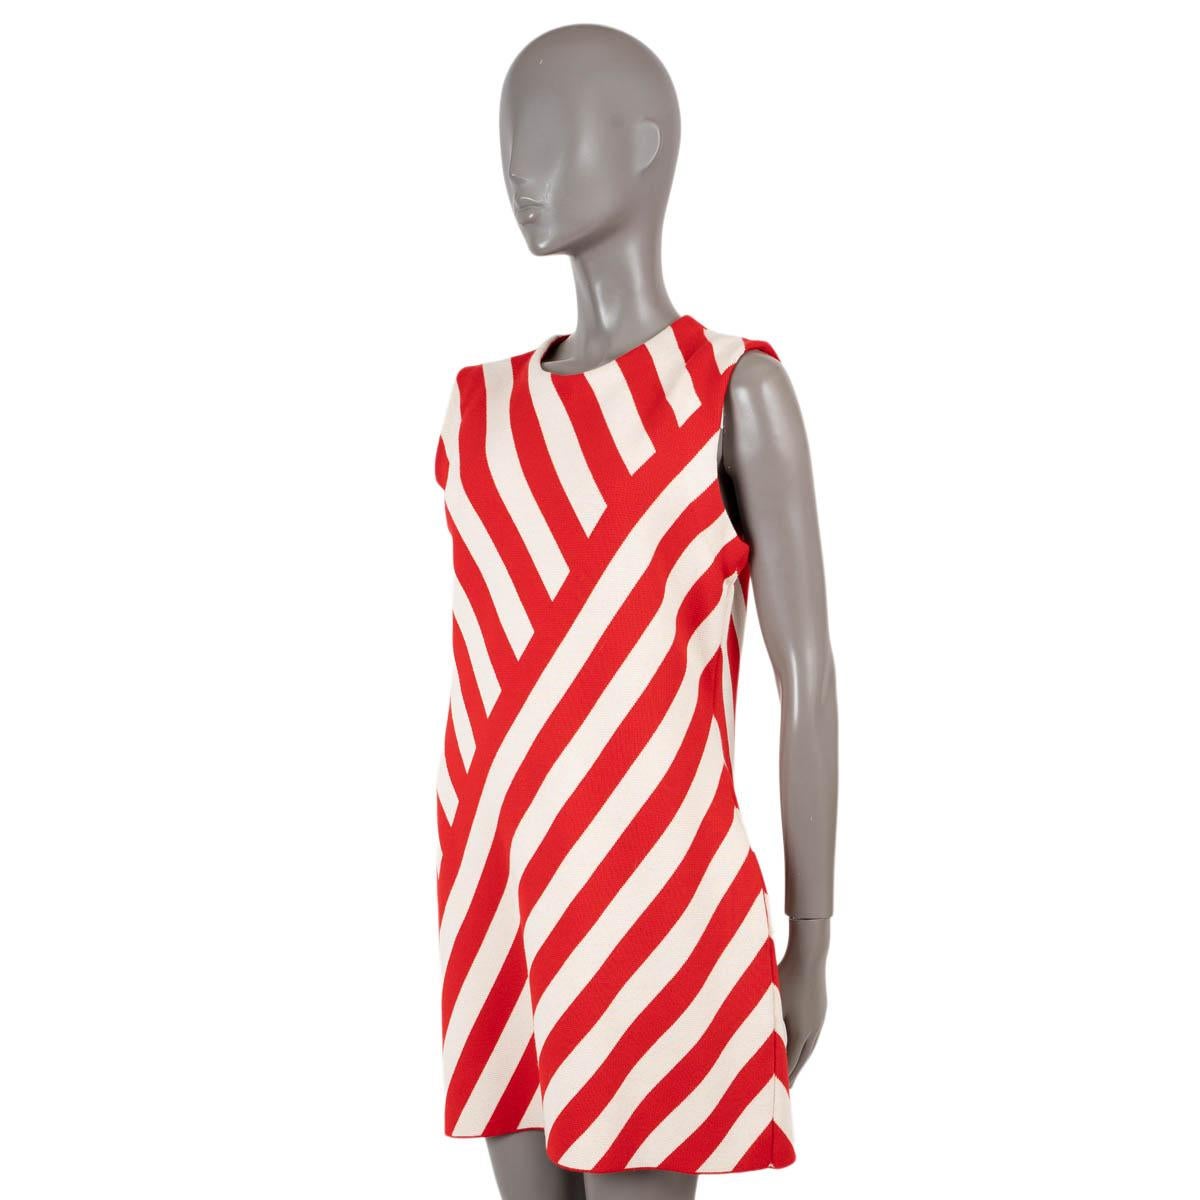 100% authentic Gucci sleeveless mini dress in red and cream jacquard knit wool (52%) and cotton (48%). Features stripe pattern, crewneck and slit pockets on the side. Has been worn and is in excellent condition. 

2023